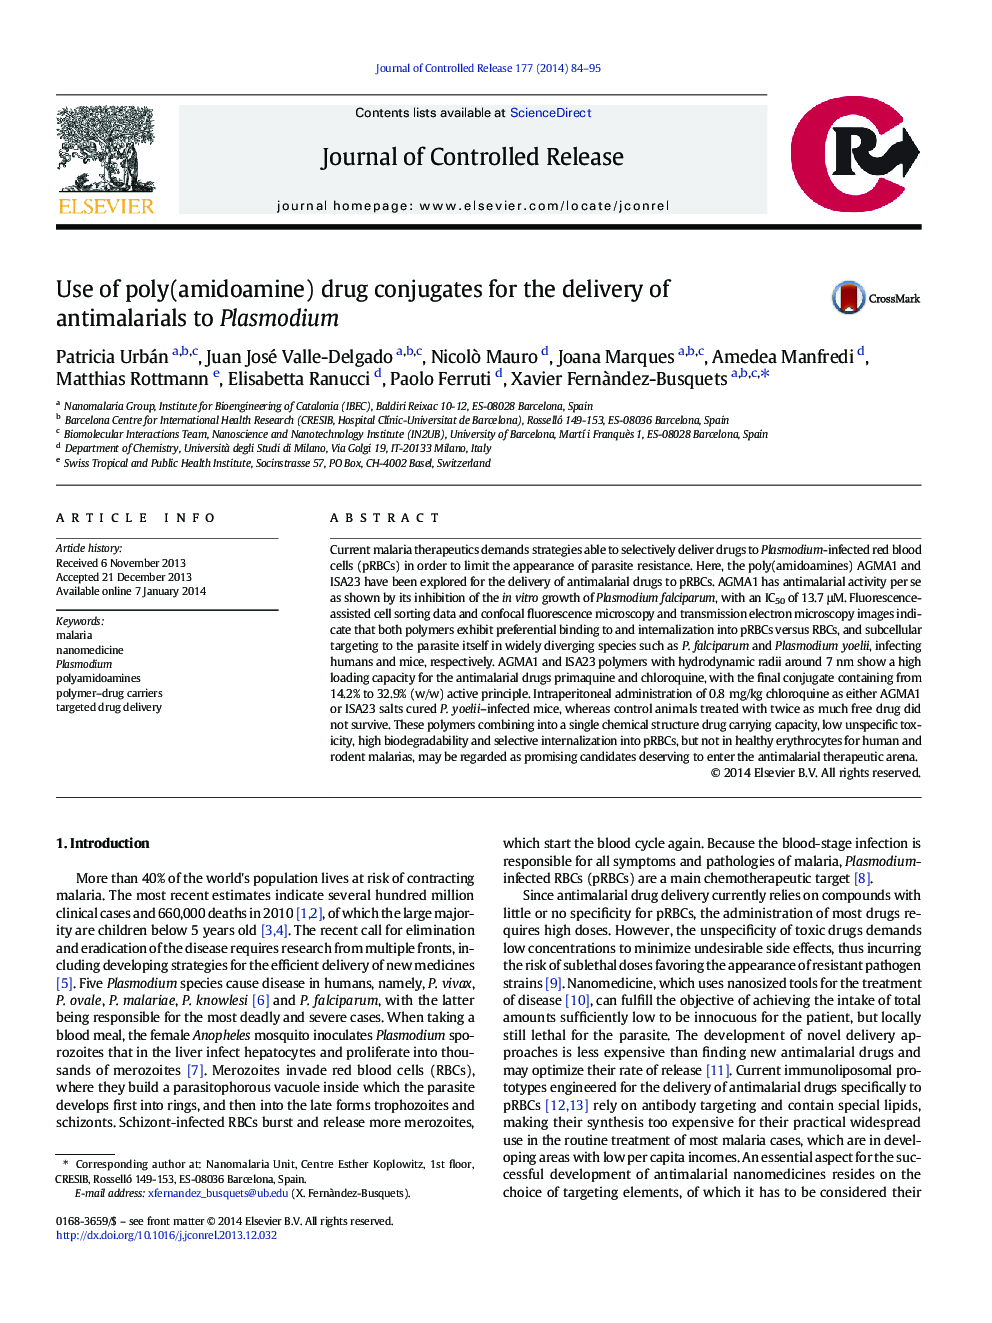 Use of poly(amidoamine) drug conjugates for the delivery of antimalarials to Plasmodium